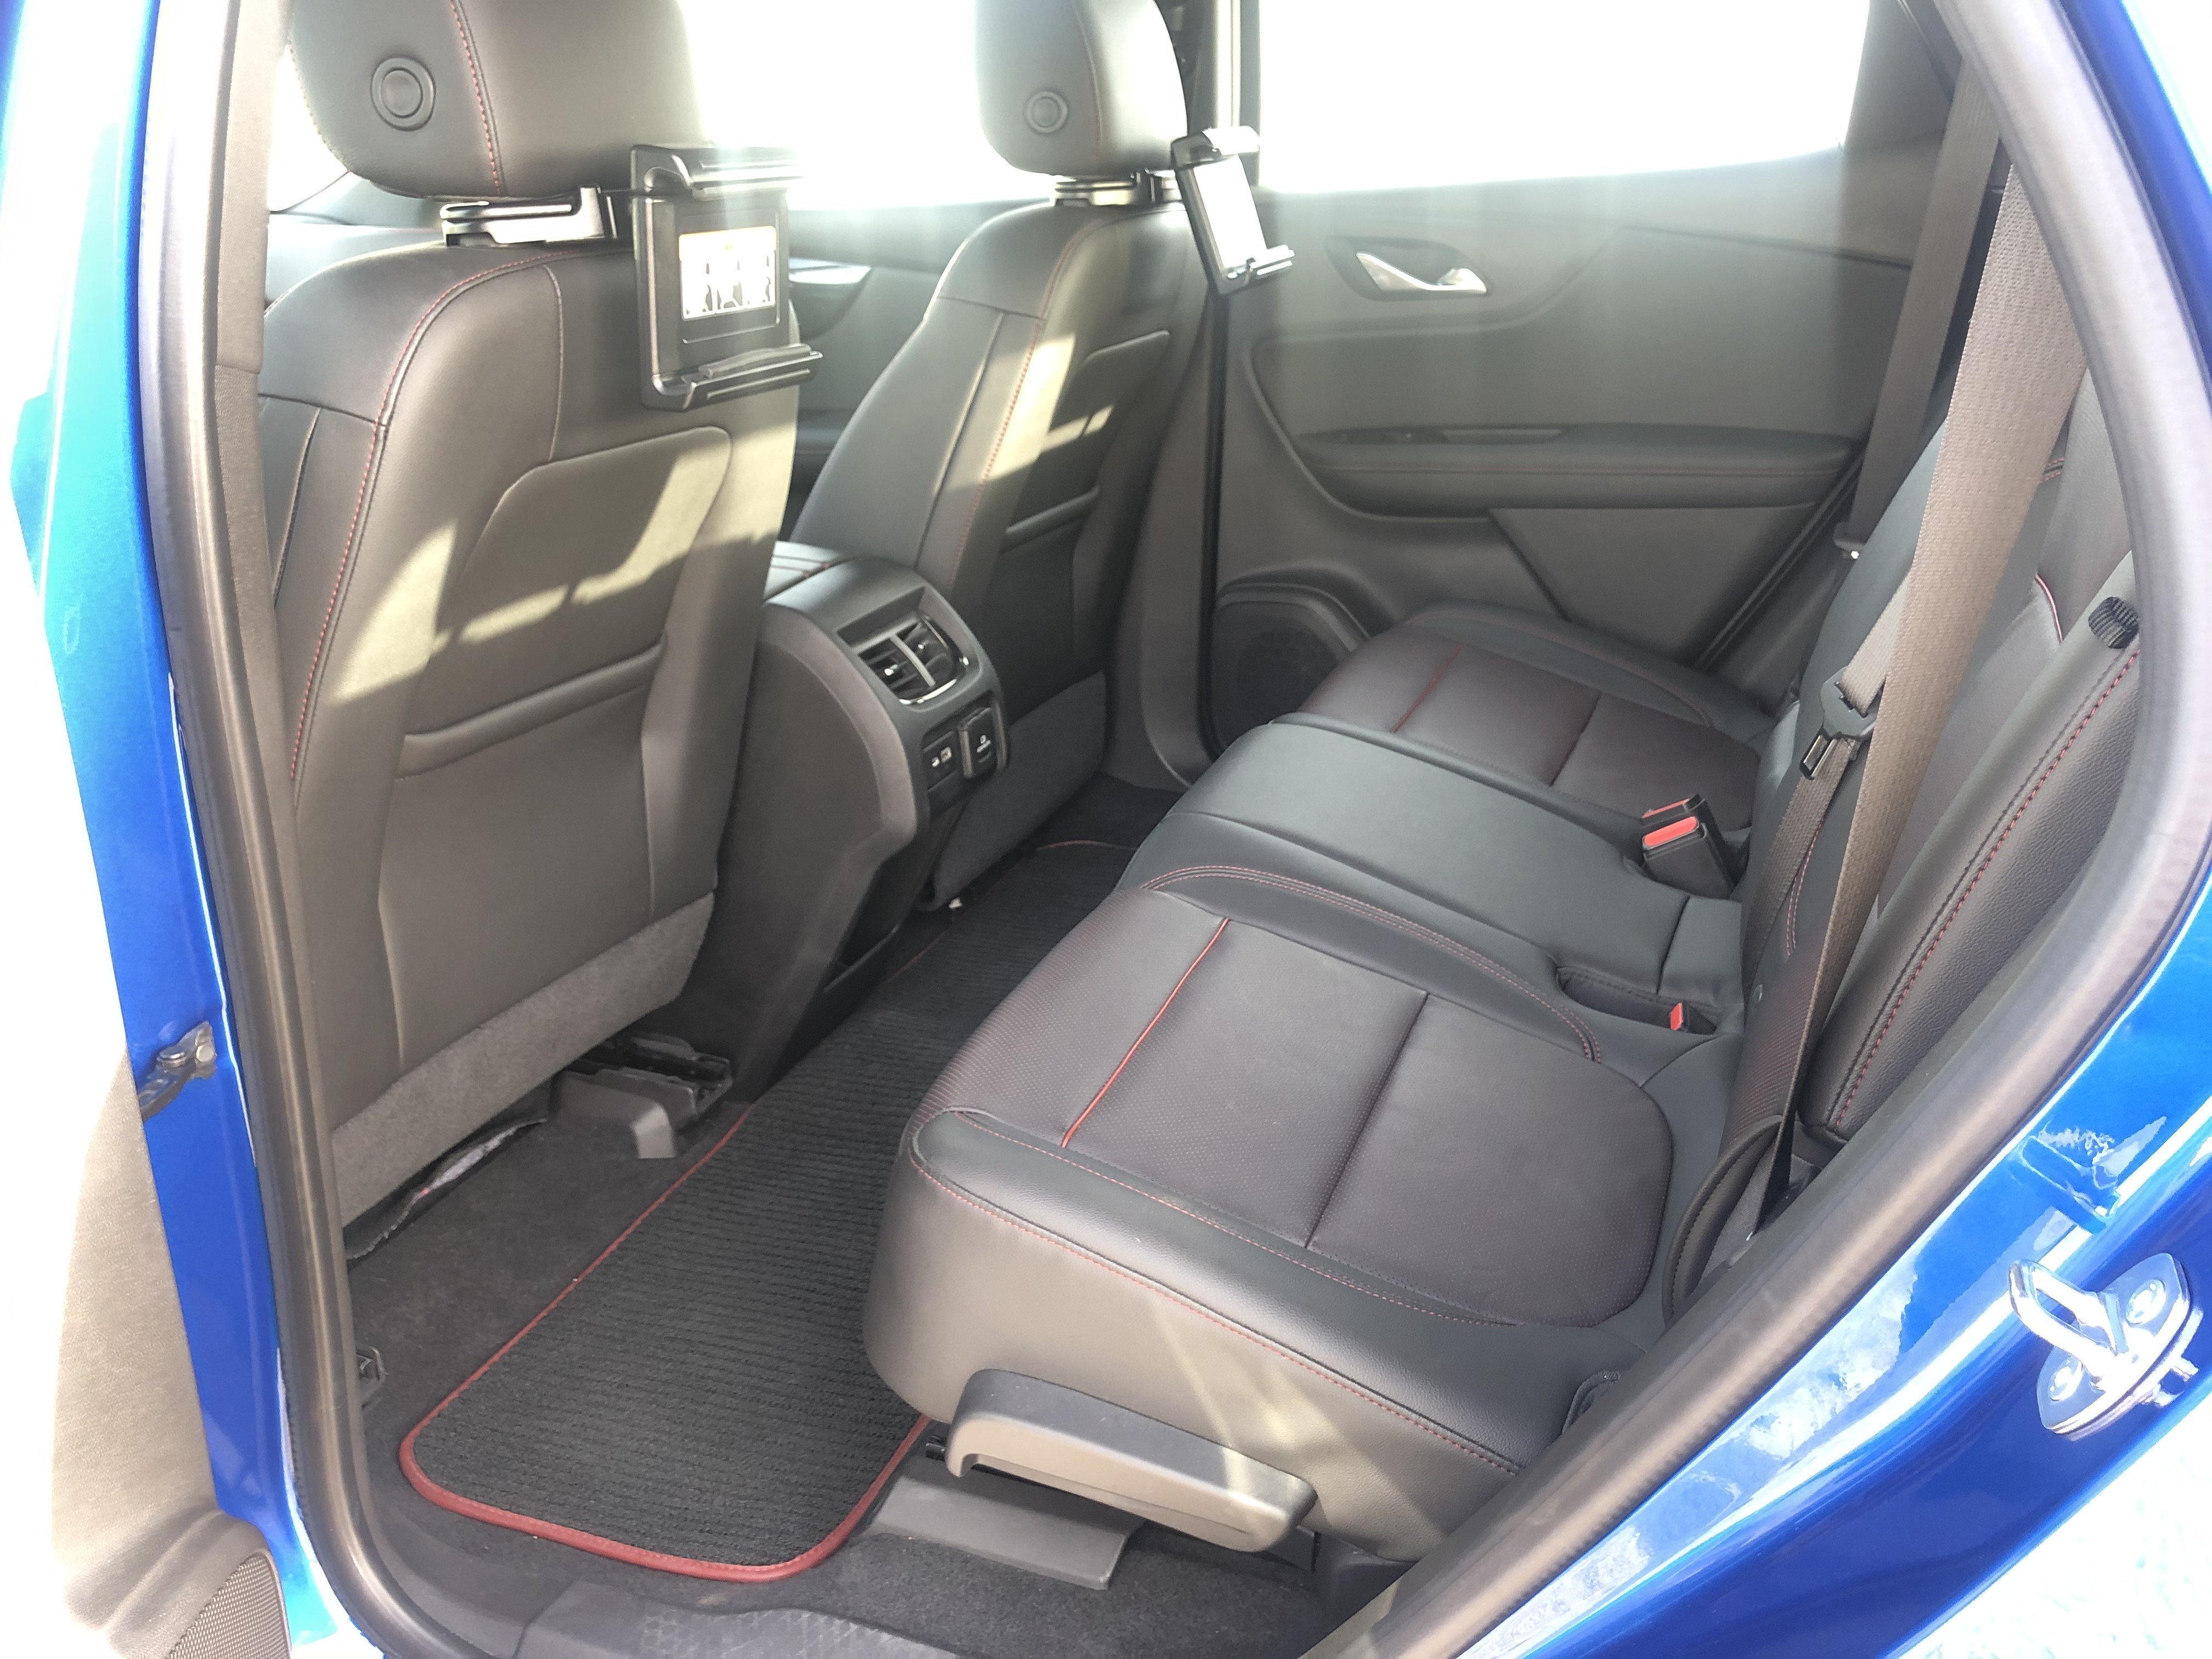 There is plenty of space for five full-size adults passengers, and the seats are comfortable. They are perforated black leather with red accents in the perforations, piping, and stitching. 